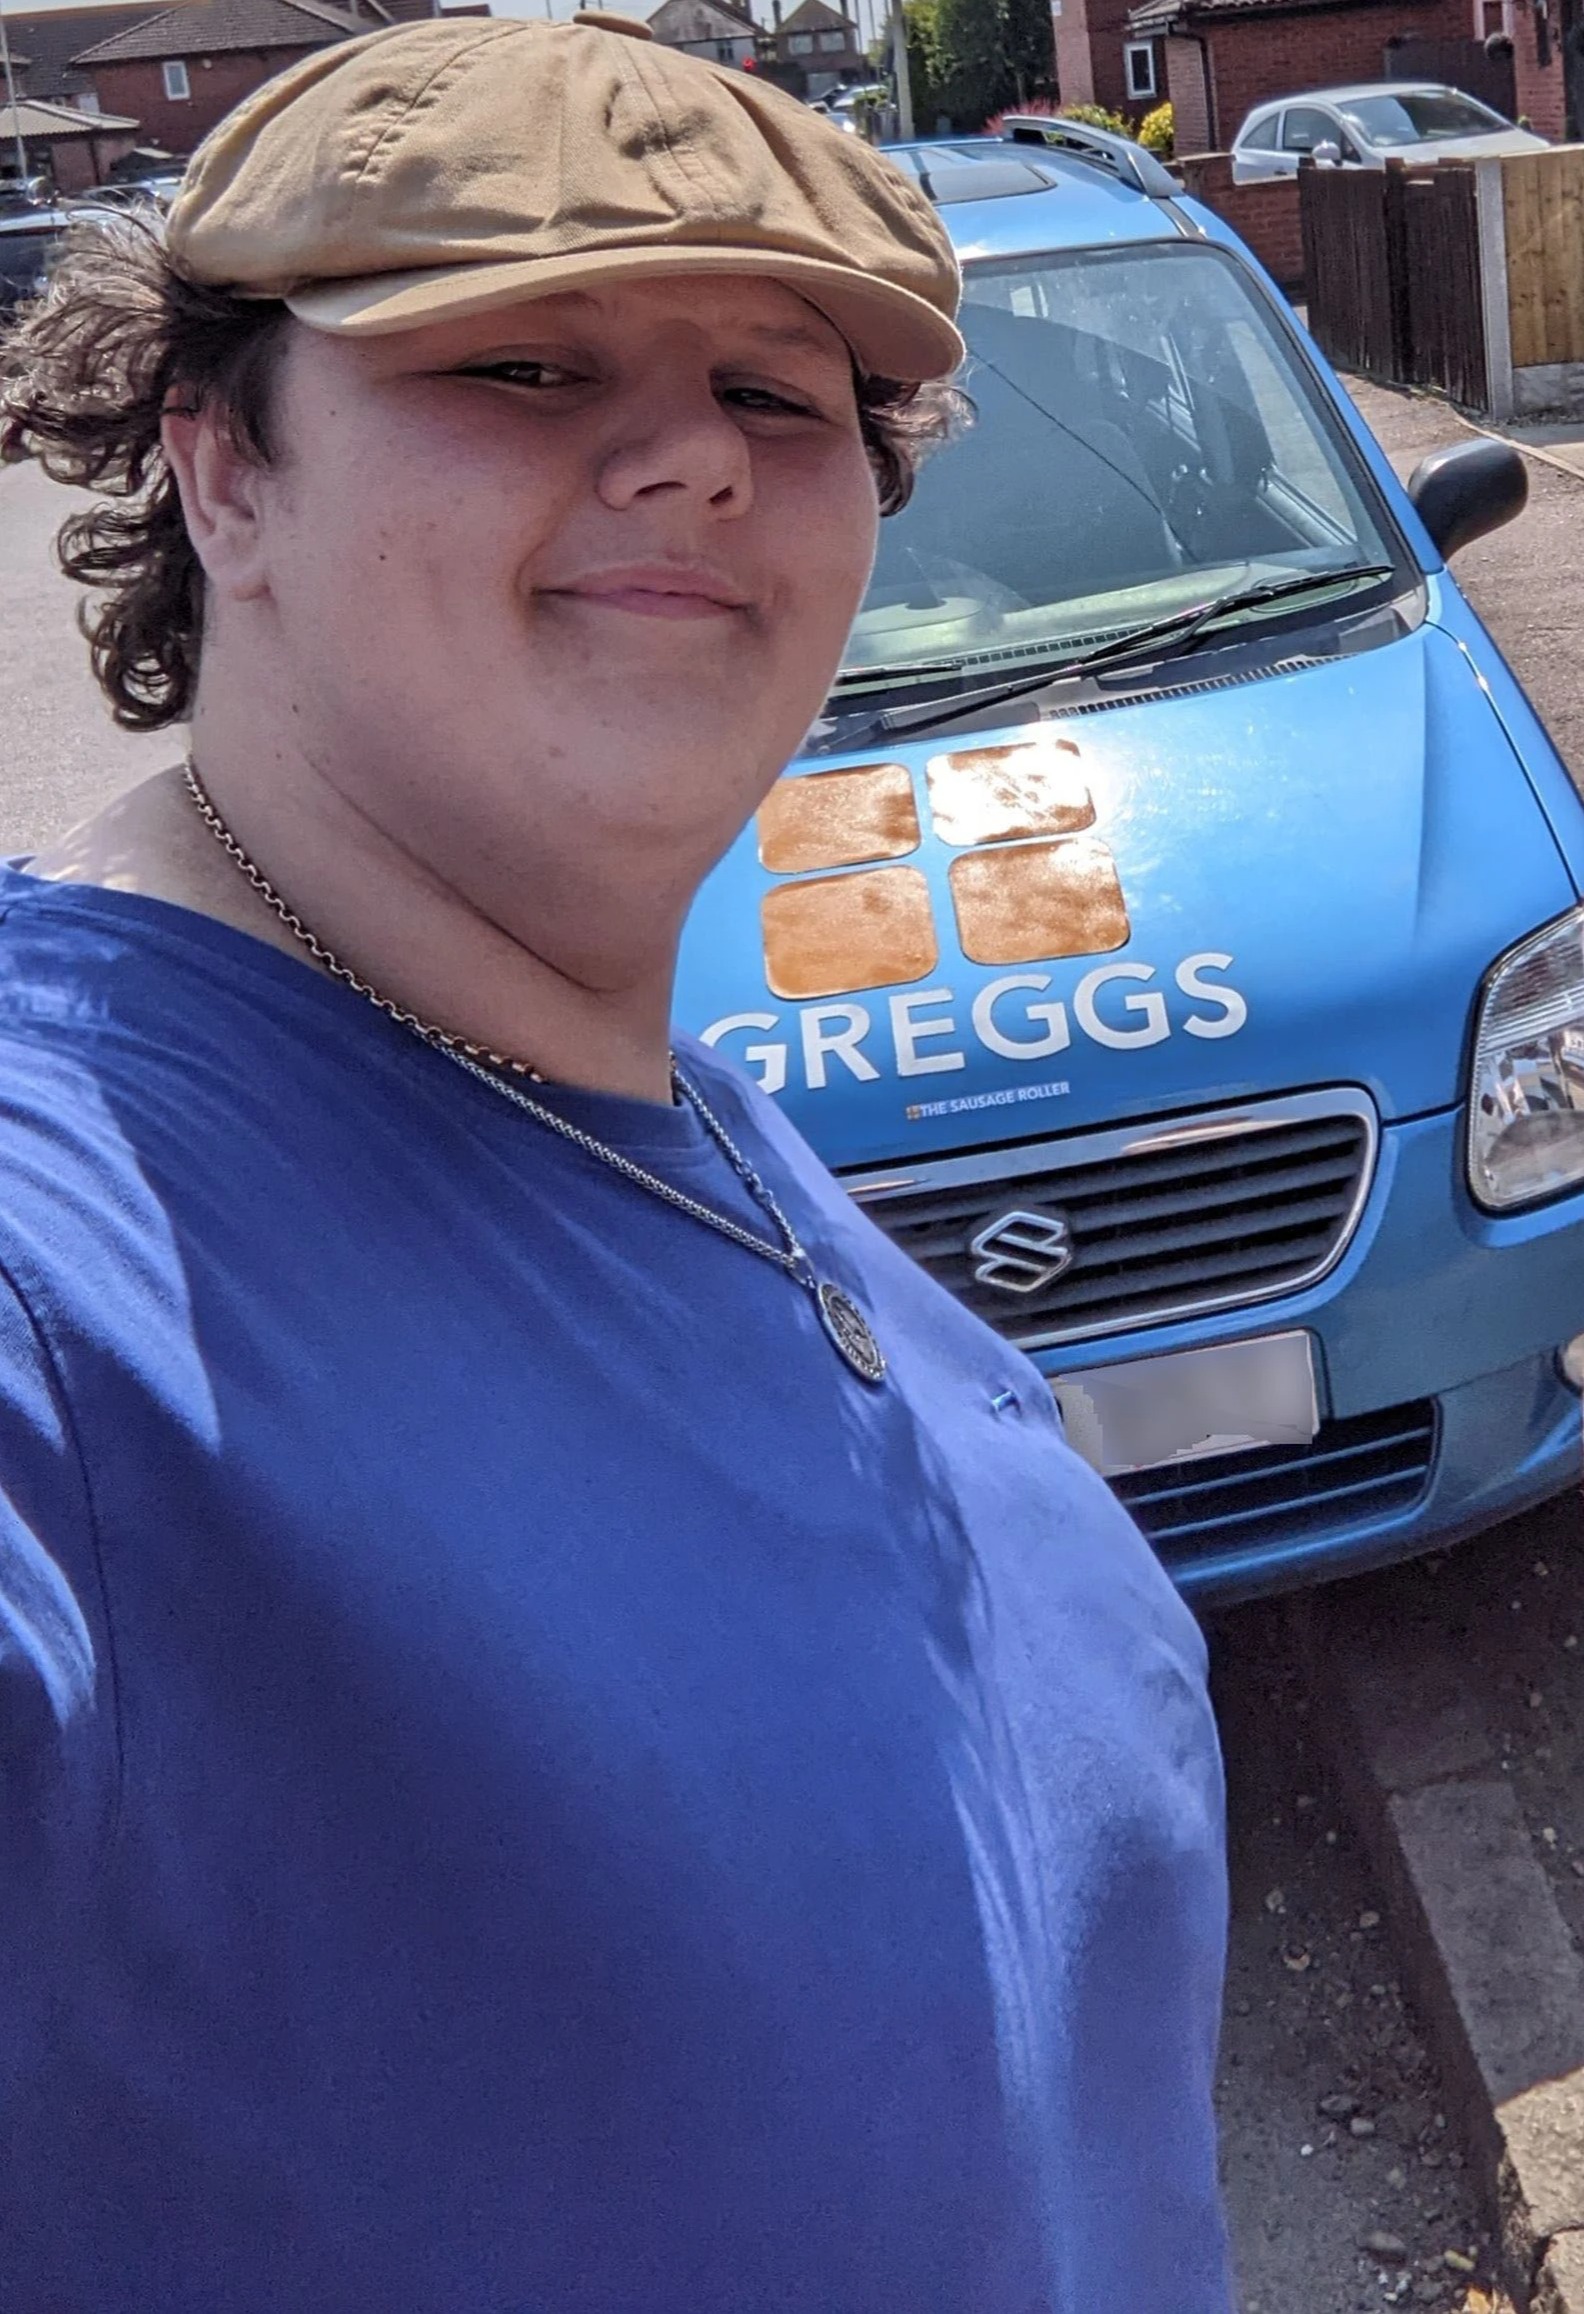 Greggs superfan Joe James pimped his car to pay tribute to the bakery chain